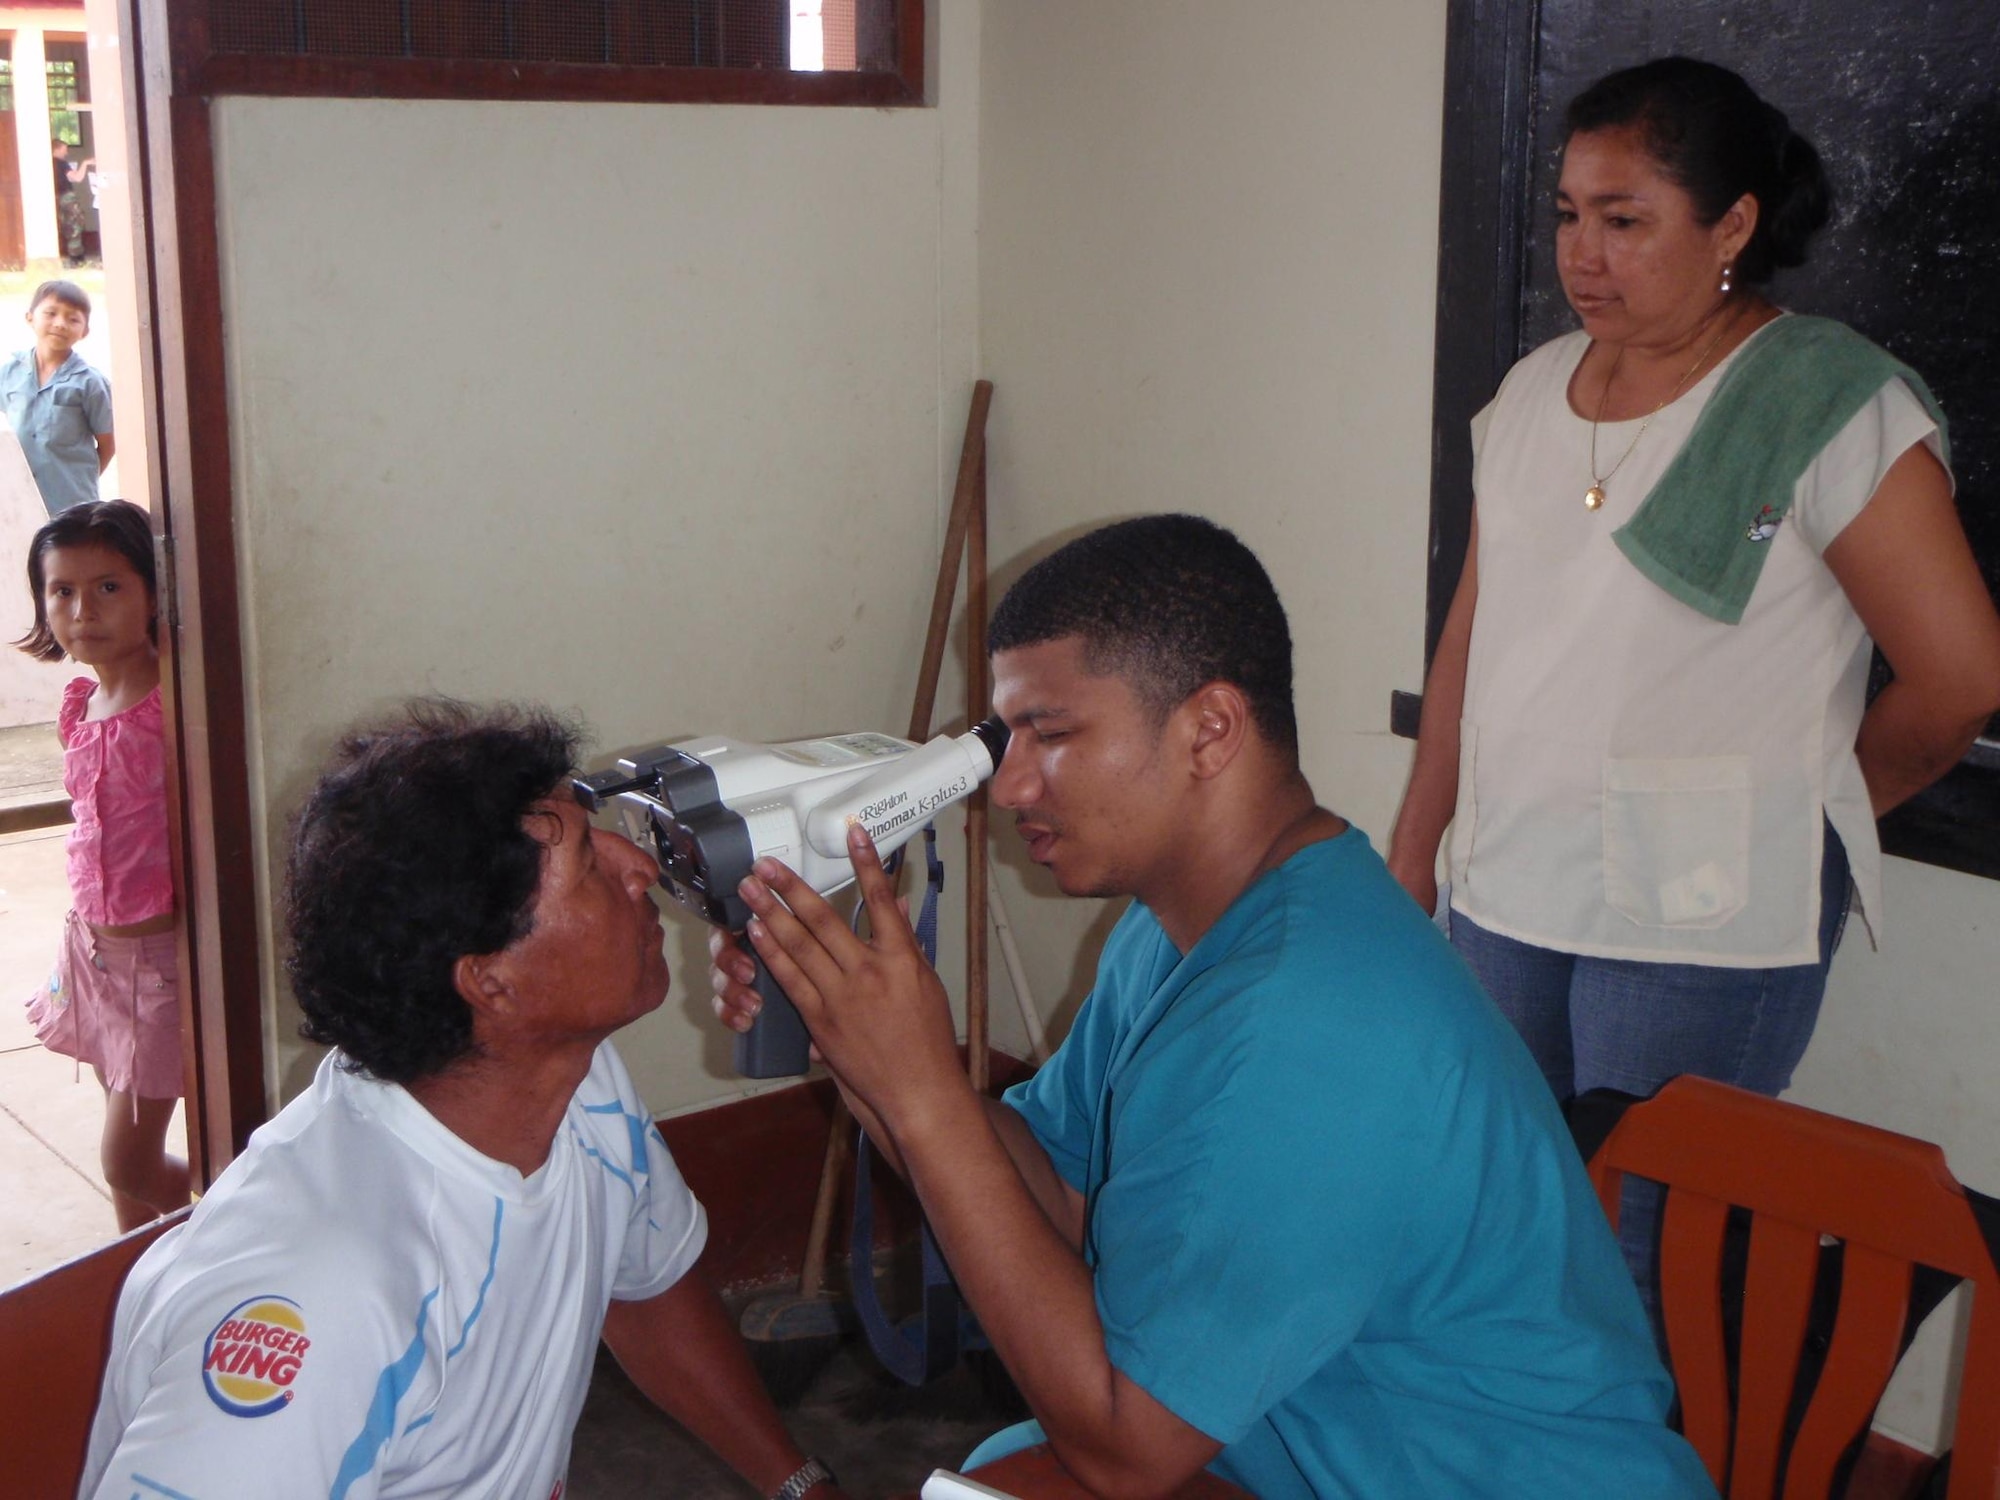 LORETO REGION, Peru -- Staff Sgt. Cristian Martinez, 96th Medical Group NCOIC of surgical services at Eglin Air Force Base, examines an optometry patient during a medical mission here March 12.  A team of 15 Air Force doctors and technicians, along with more than 50 Peruvian Navy, Ministry of Health, and civilian practitioners, treated patients in the remote region for two weeks as part of the ongoing Riverine Project, a three year humanitarian medical project sponsored by Twelfth Air Force (Air Forces Southern).  (U.S. Air Force photo by Master Sgt. Jesse Moreno)